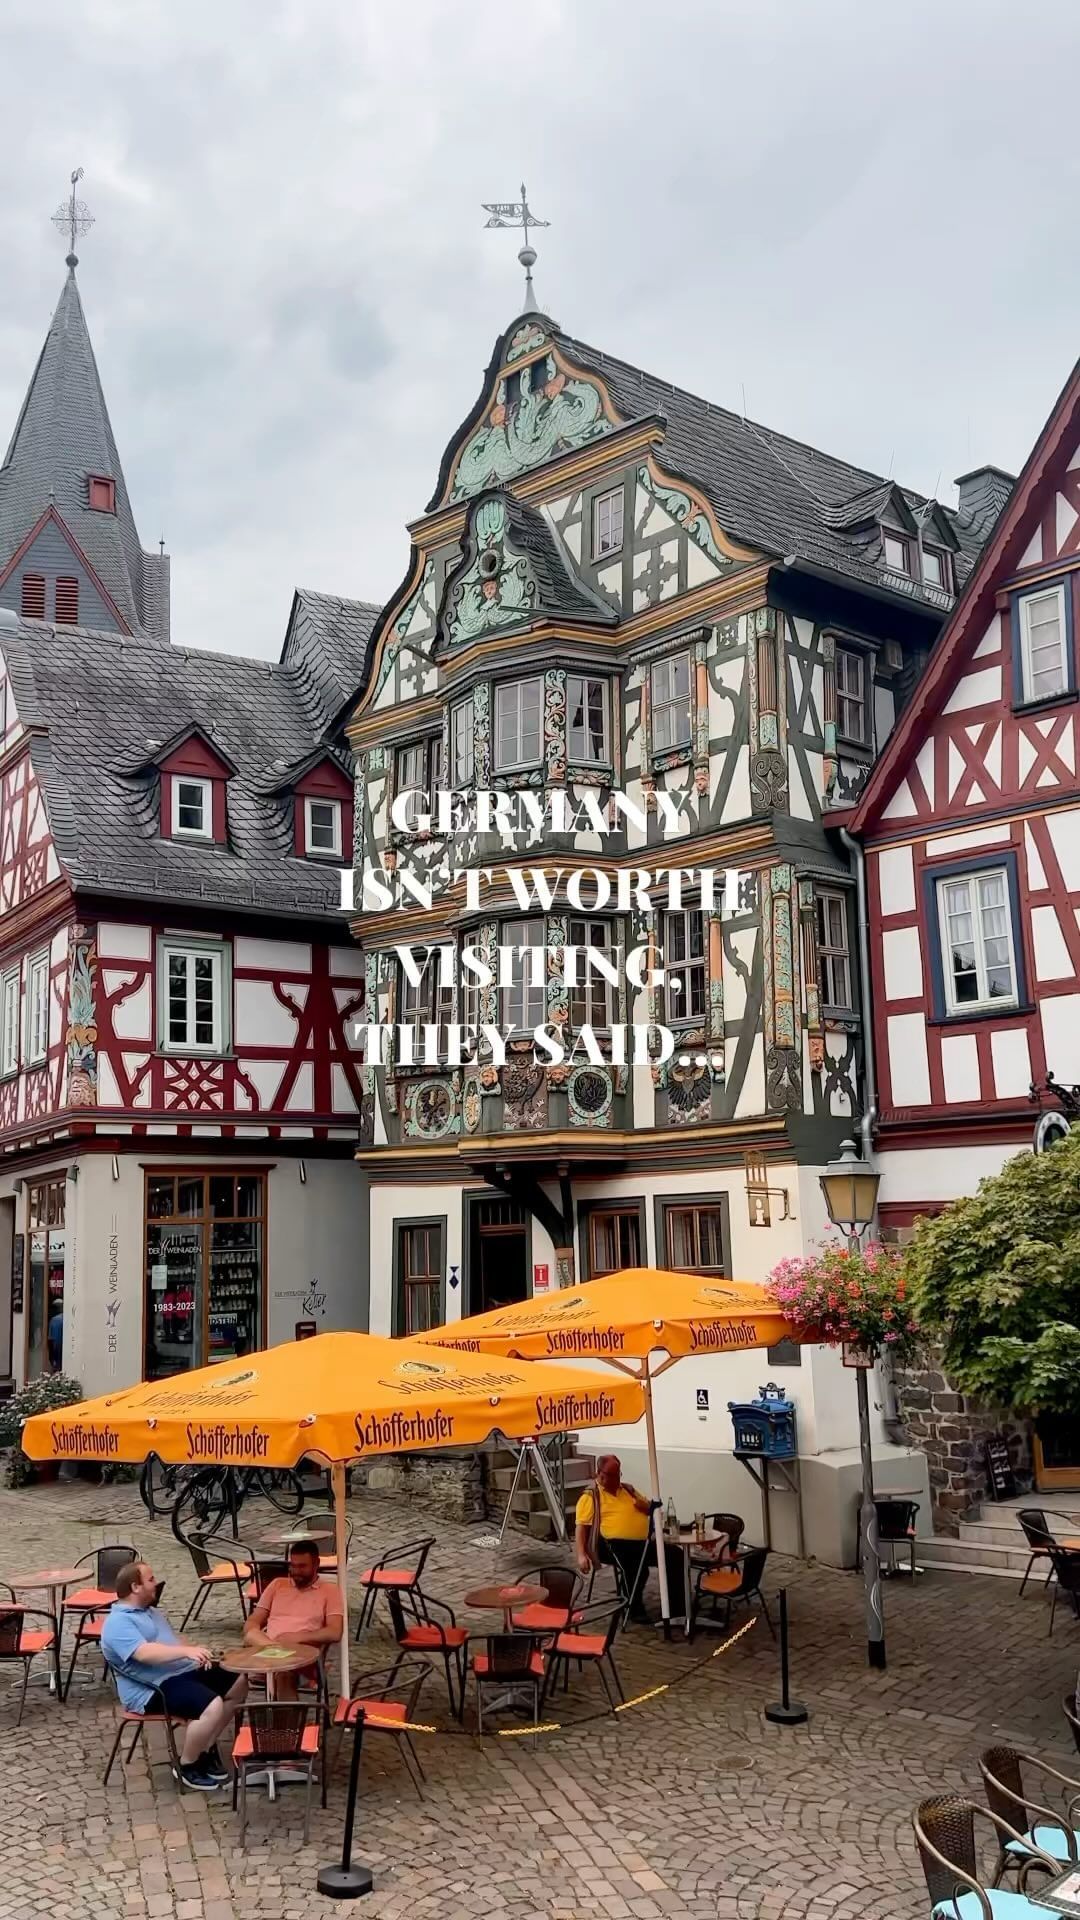 Idstein Day Trip: Hexenturm, Castle, and More